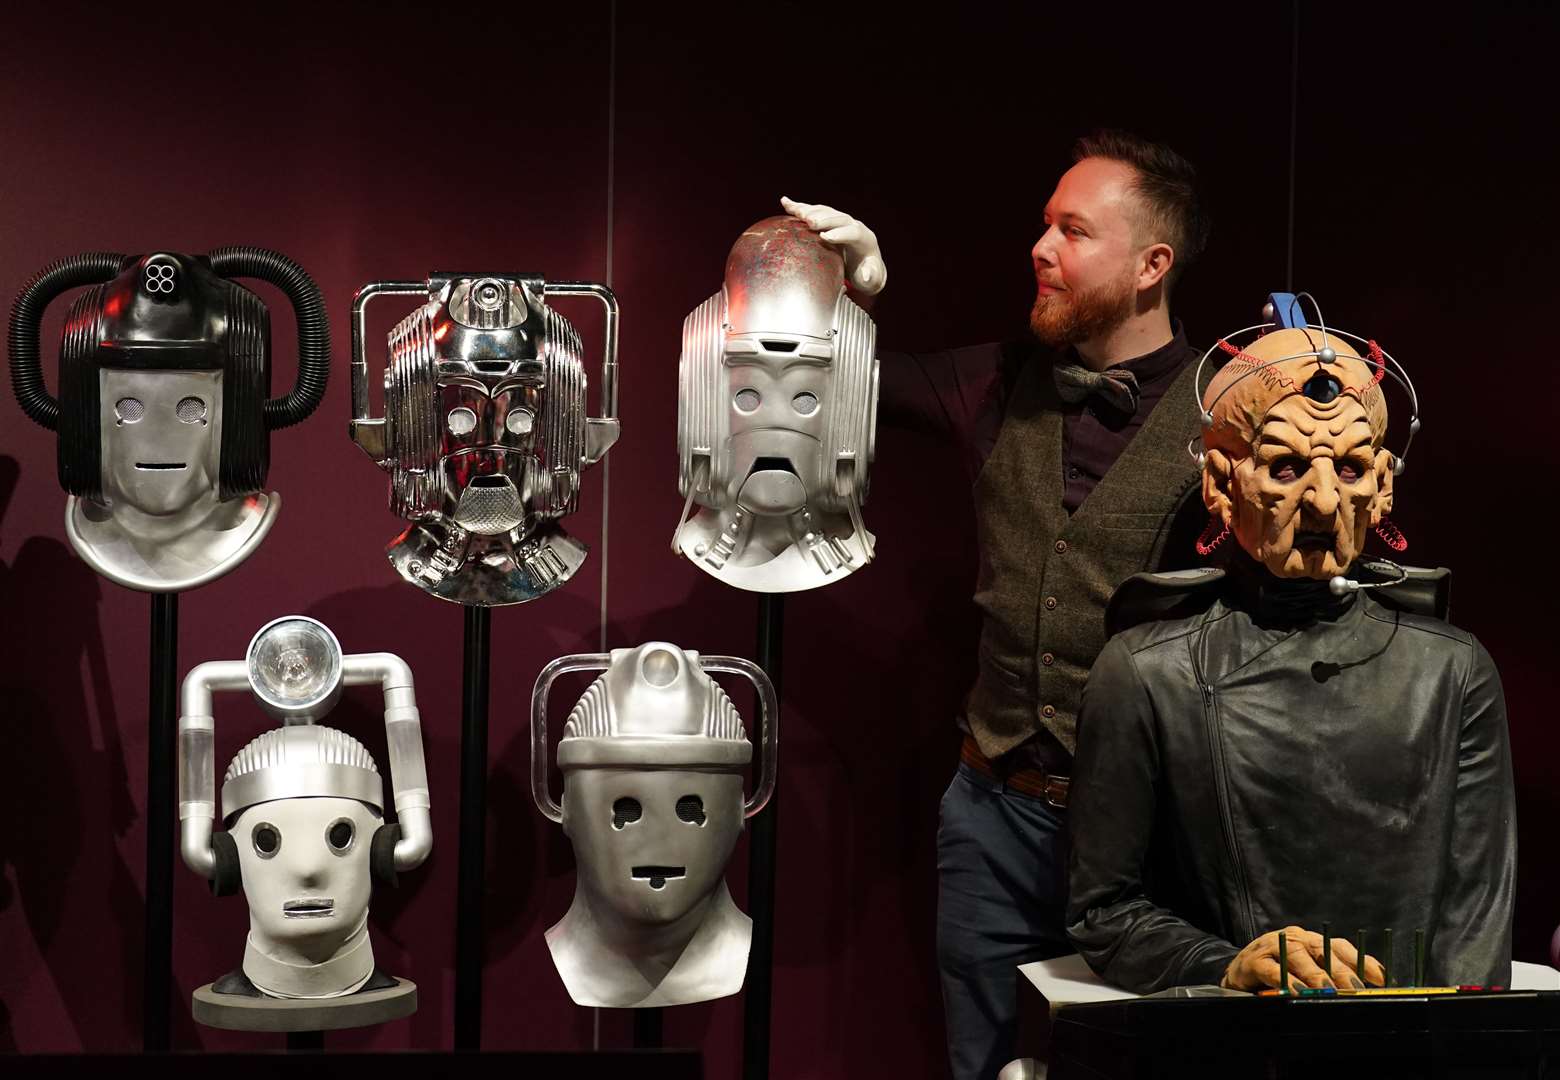 David Smith from the National Museum of Scotland with exhibits at the Doctor Who Worlds of Wonder exhibition, at National Museum Of Scotland in Edinburgh.